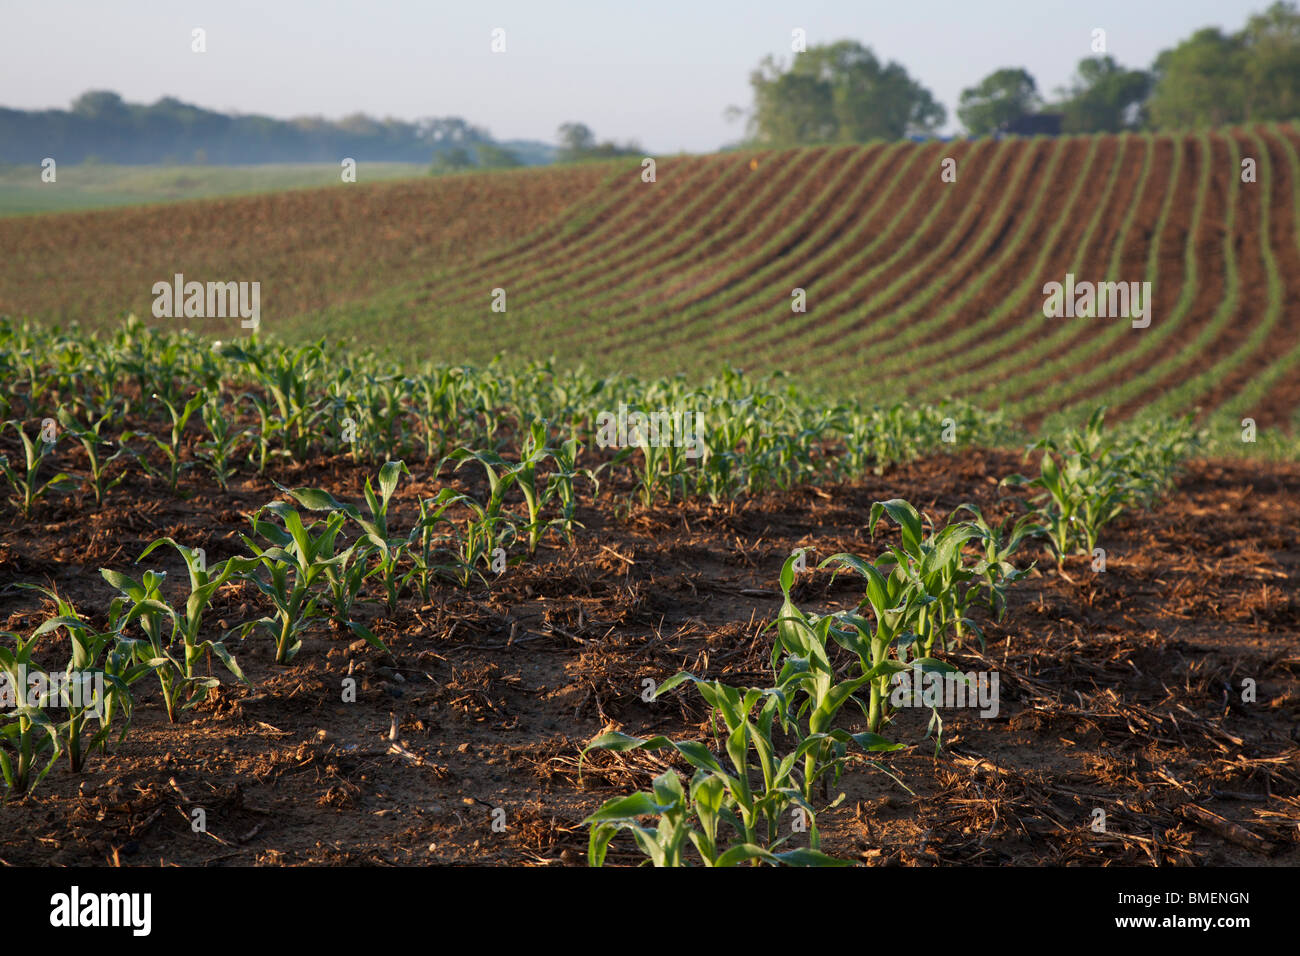 New Palestine, Indiana - A corn crop on a farm in central Indiana. Stock Photo